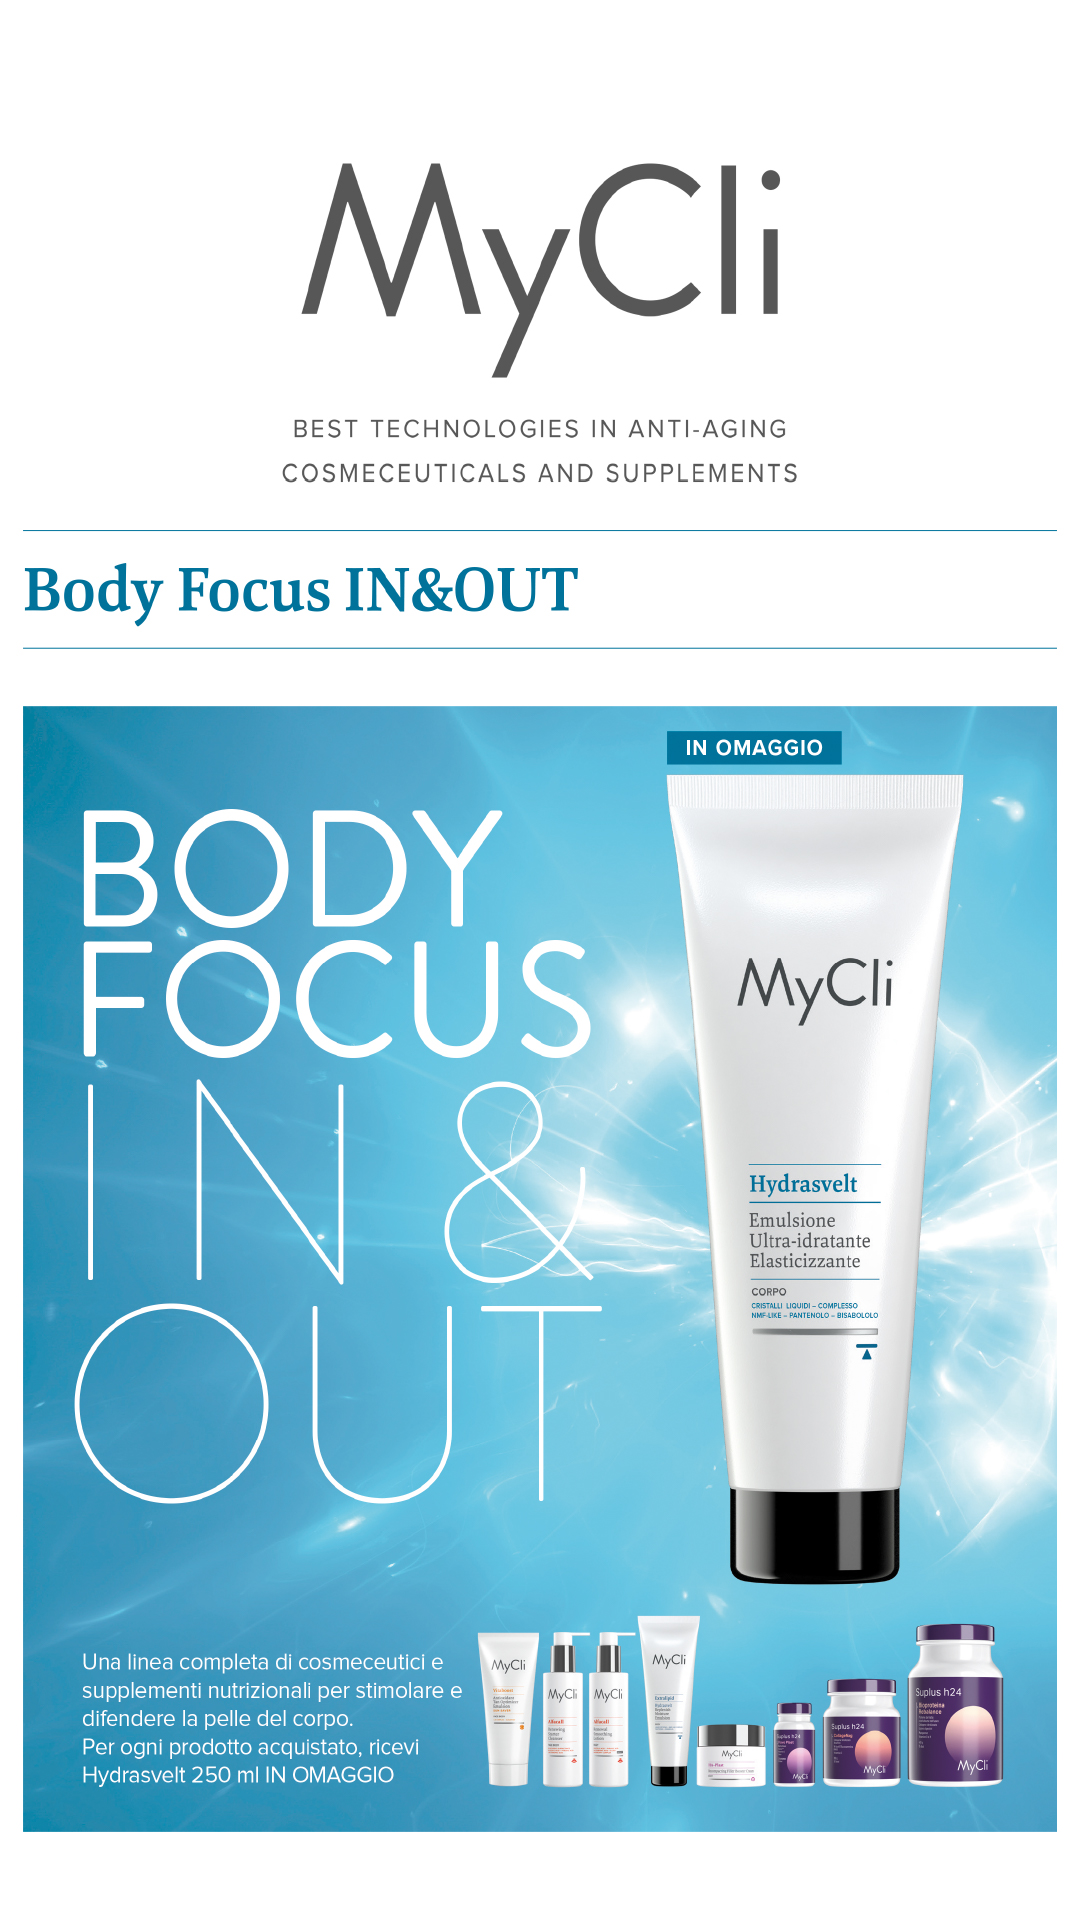 V-MYCLI BODY FOCUS IN&OUT